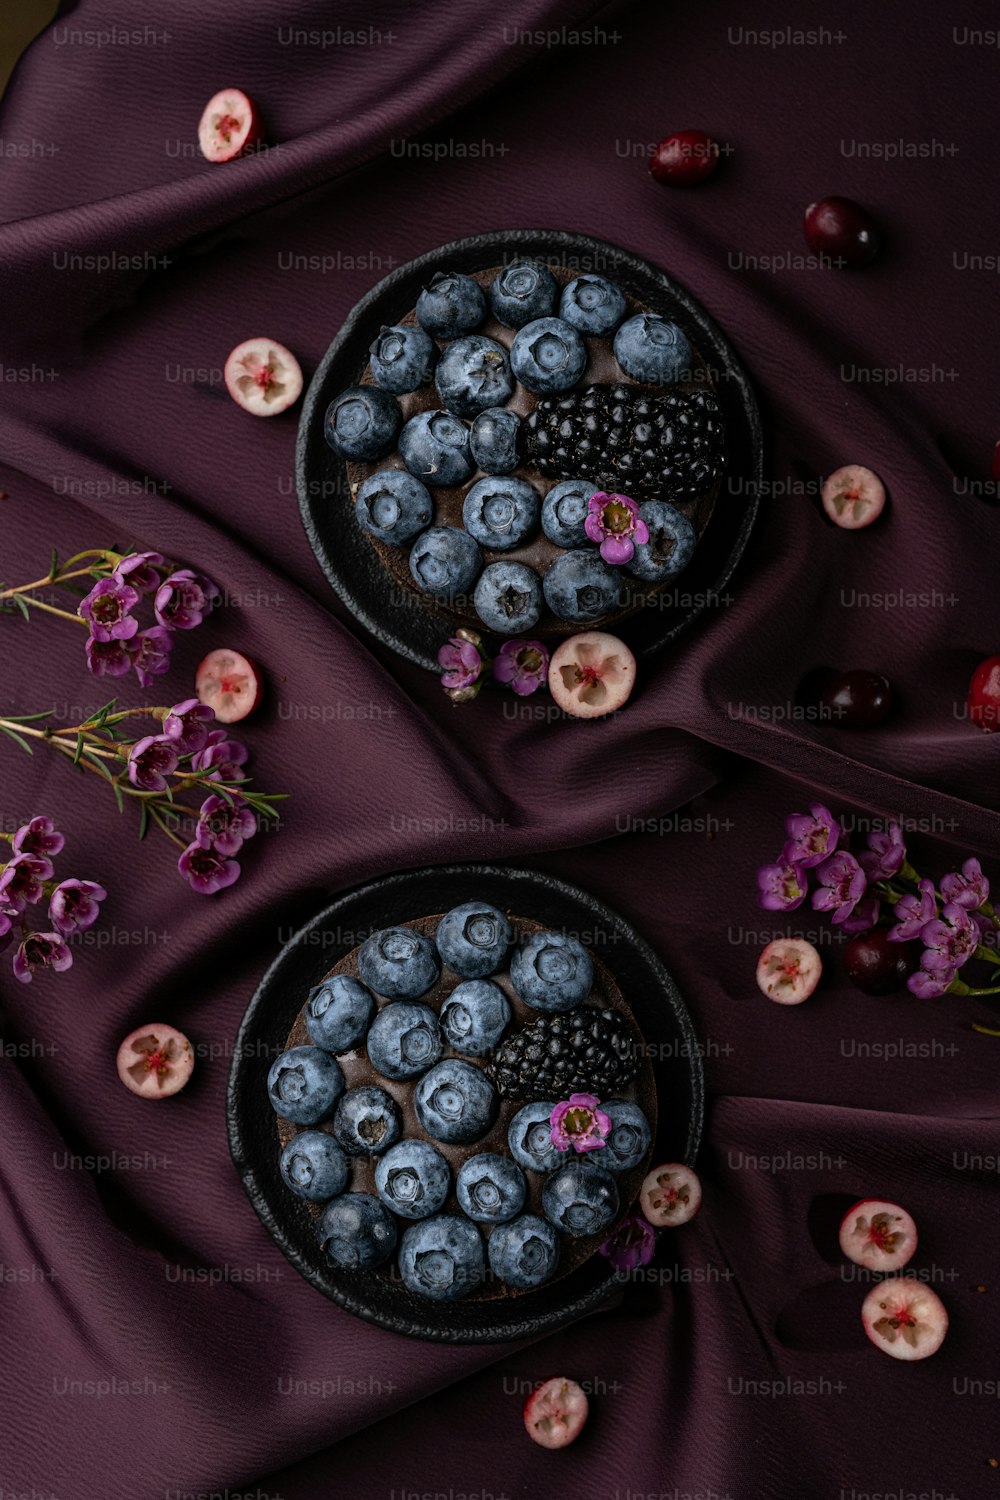 a bowl of blueberries and a bowl of cherries on a purple cloth